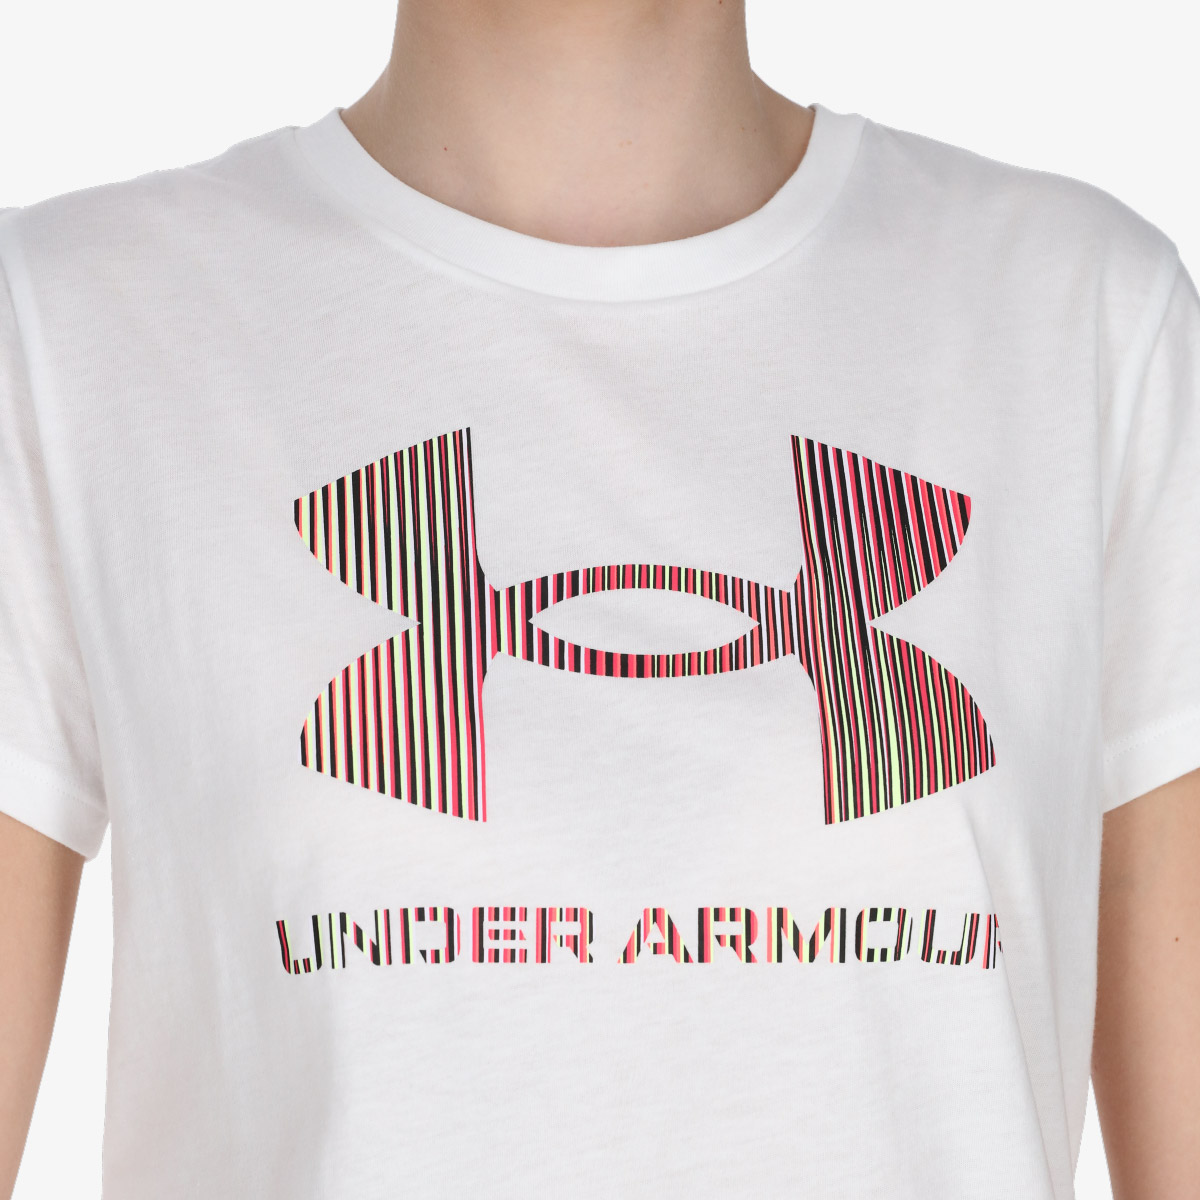 Under Armour Live Sportstyle Graphic 